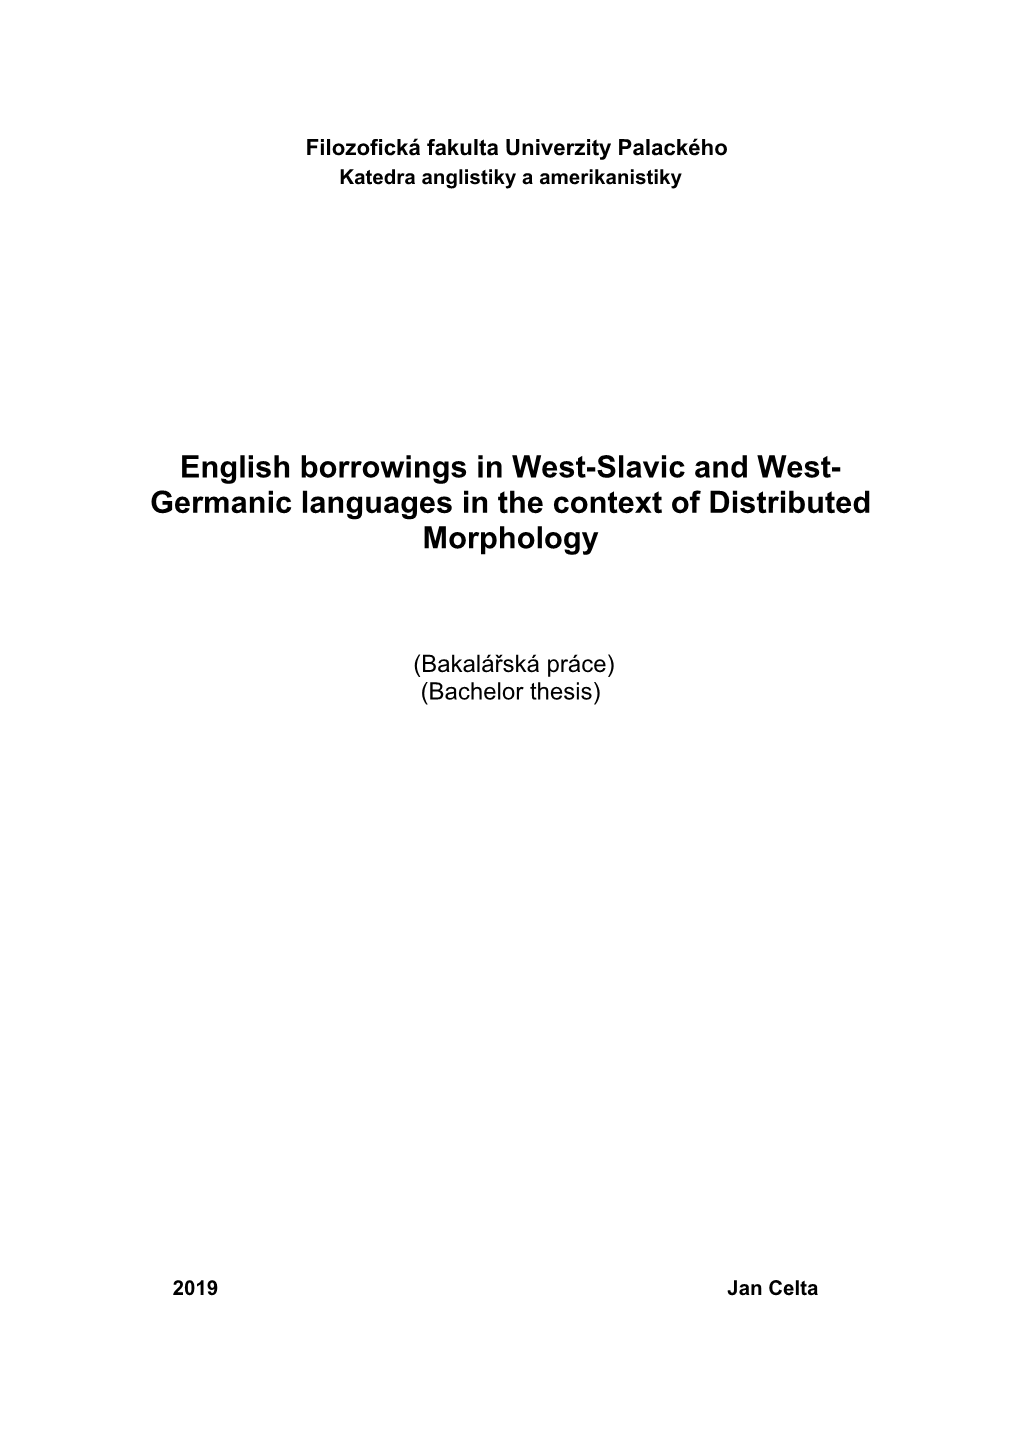 English Borrowings in West-Slavic and West- Germanic Languages in the Context of Distributed Morphology